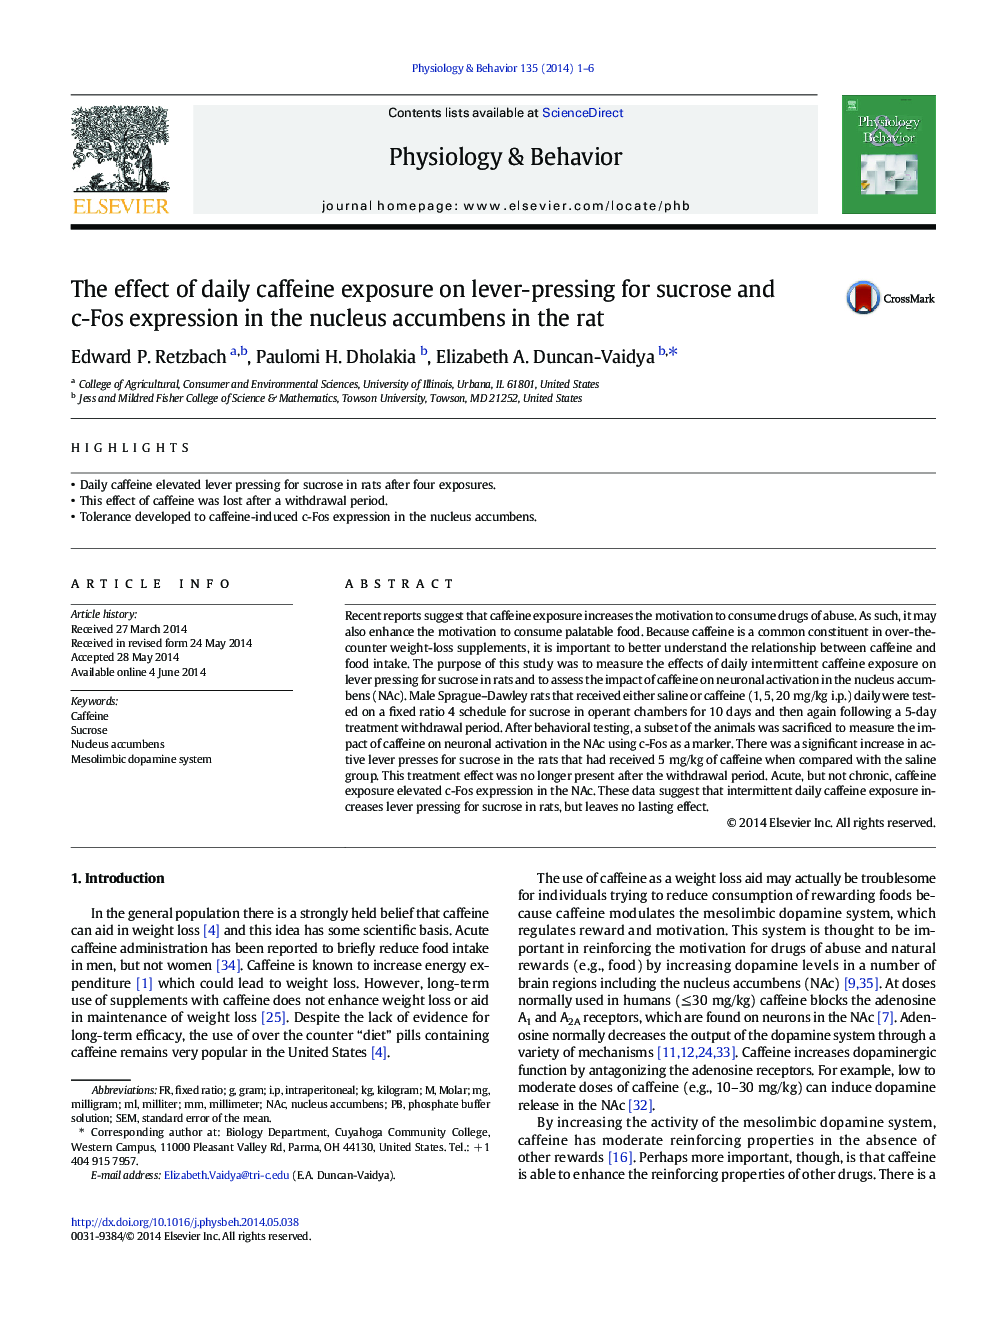 The effect of daily caffeine exposure on lever-pressing for sucrose and c-Fos expression in the nucleus accumbens in the rat